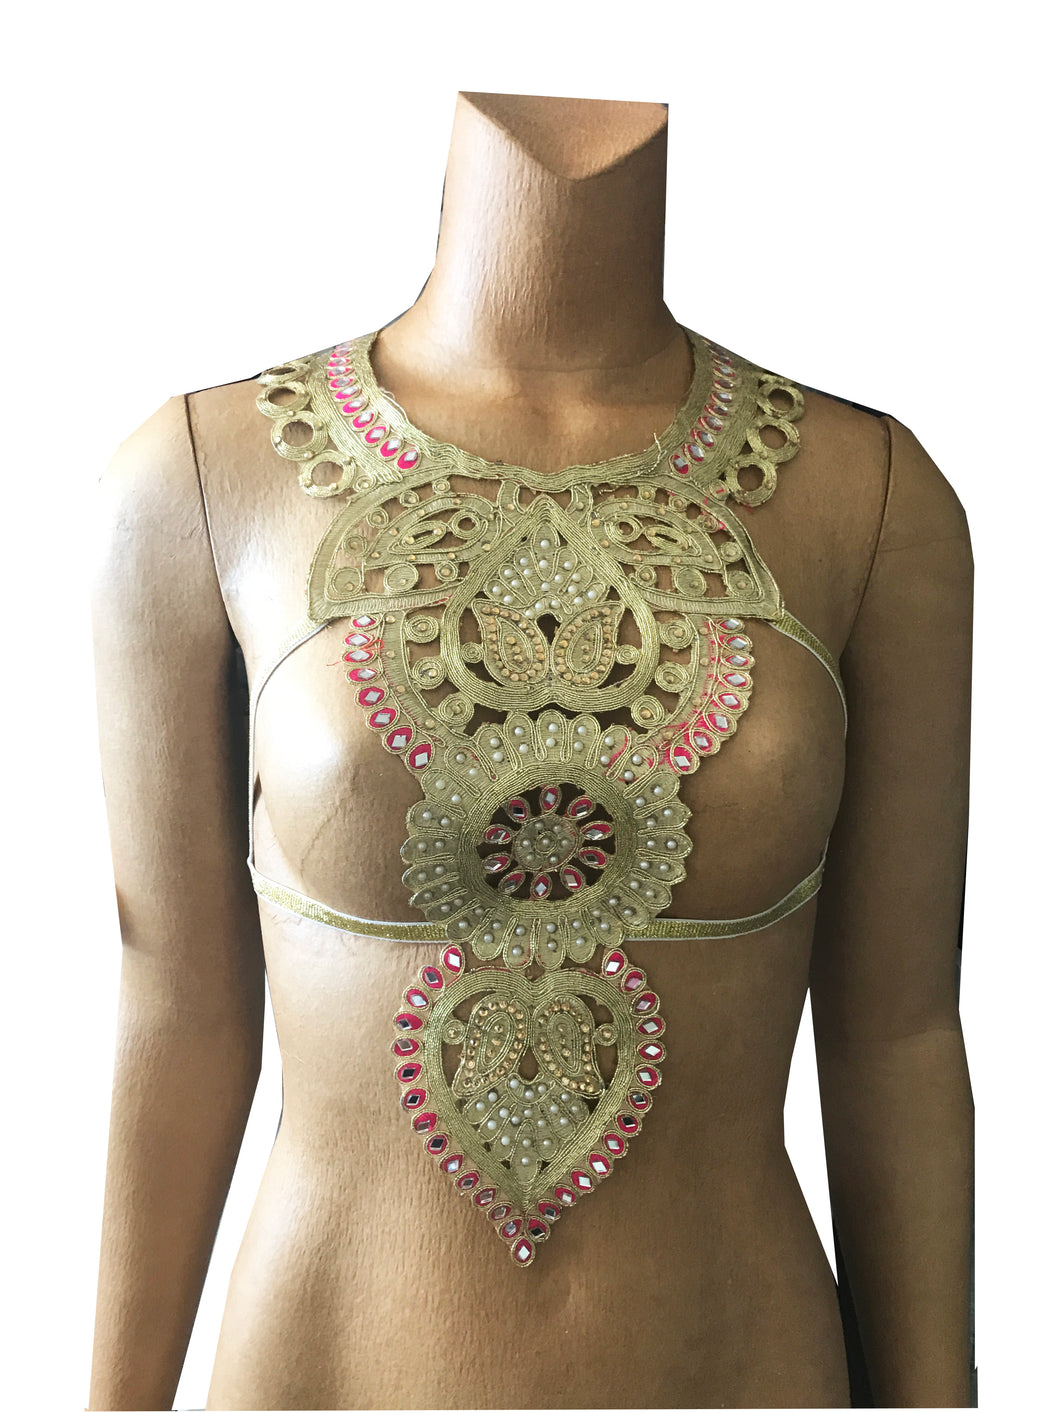 India Embroidered Gold Harness Bra Top with pink accents